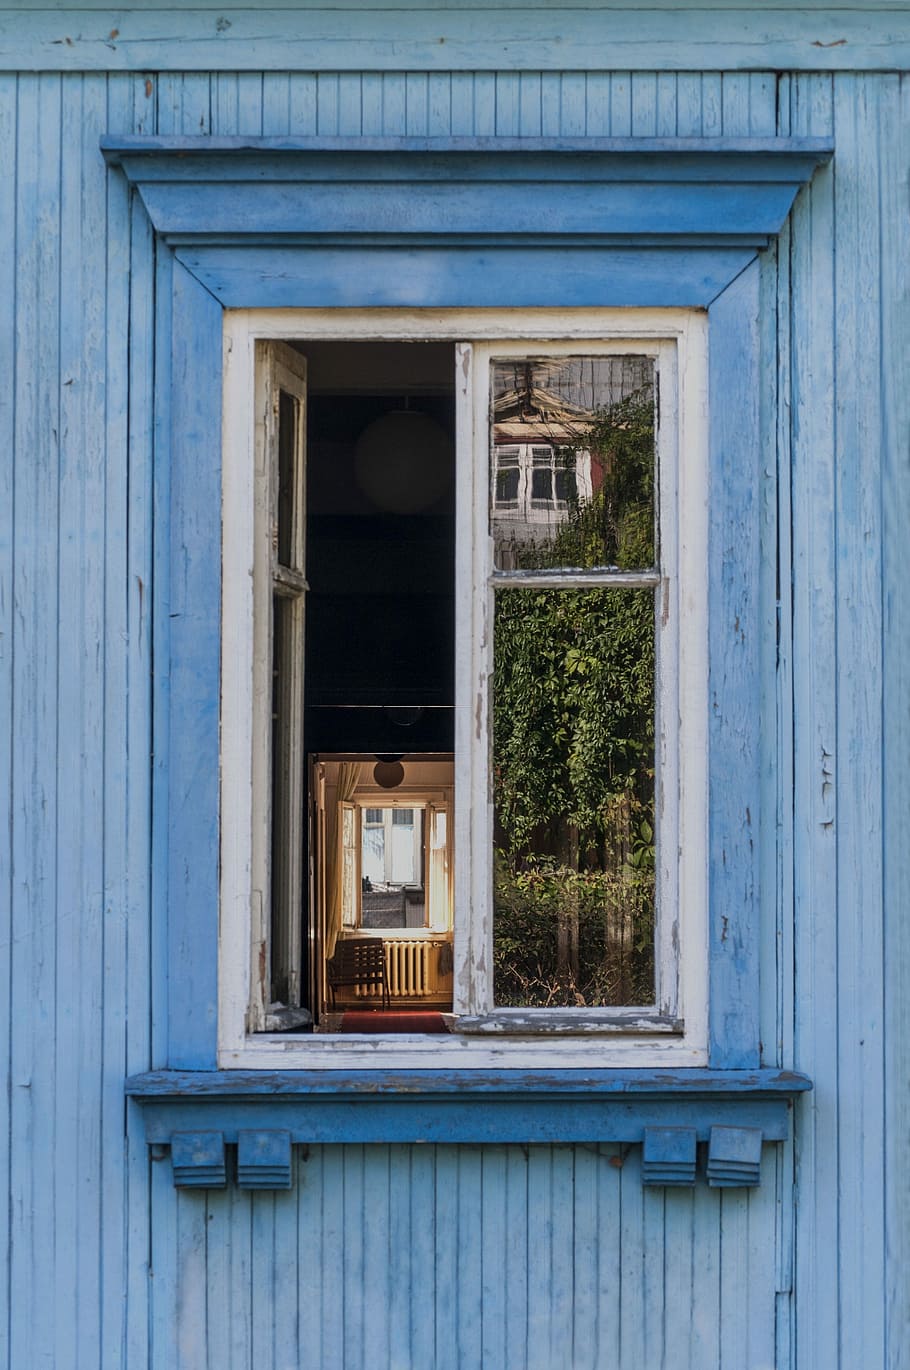 Window, House, Wood, Architecture, old window, old house, building exterior, door, outdoors, day